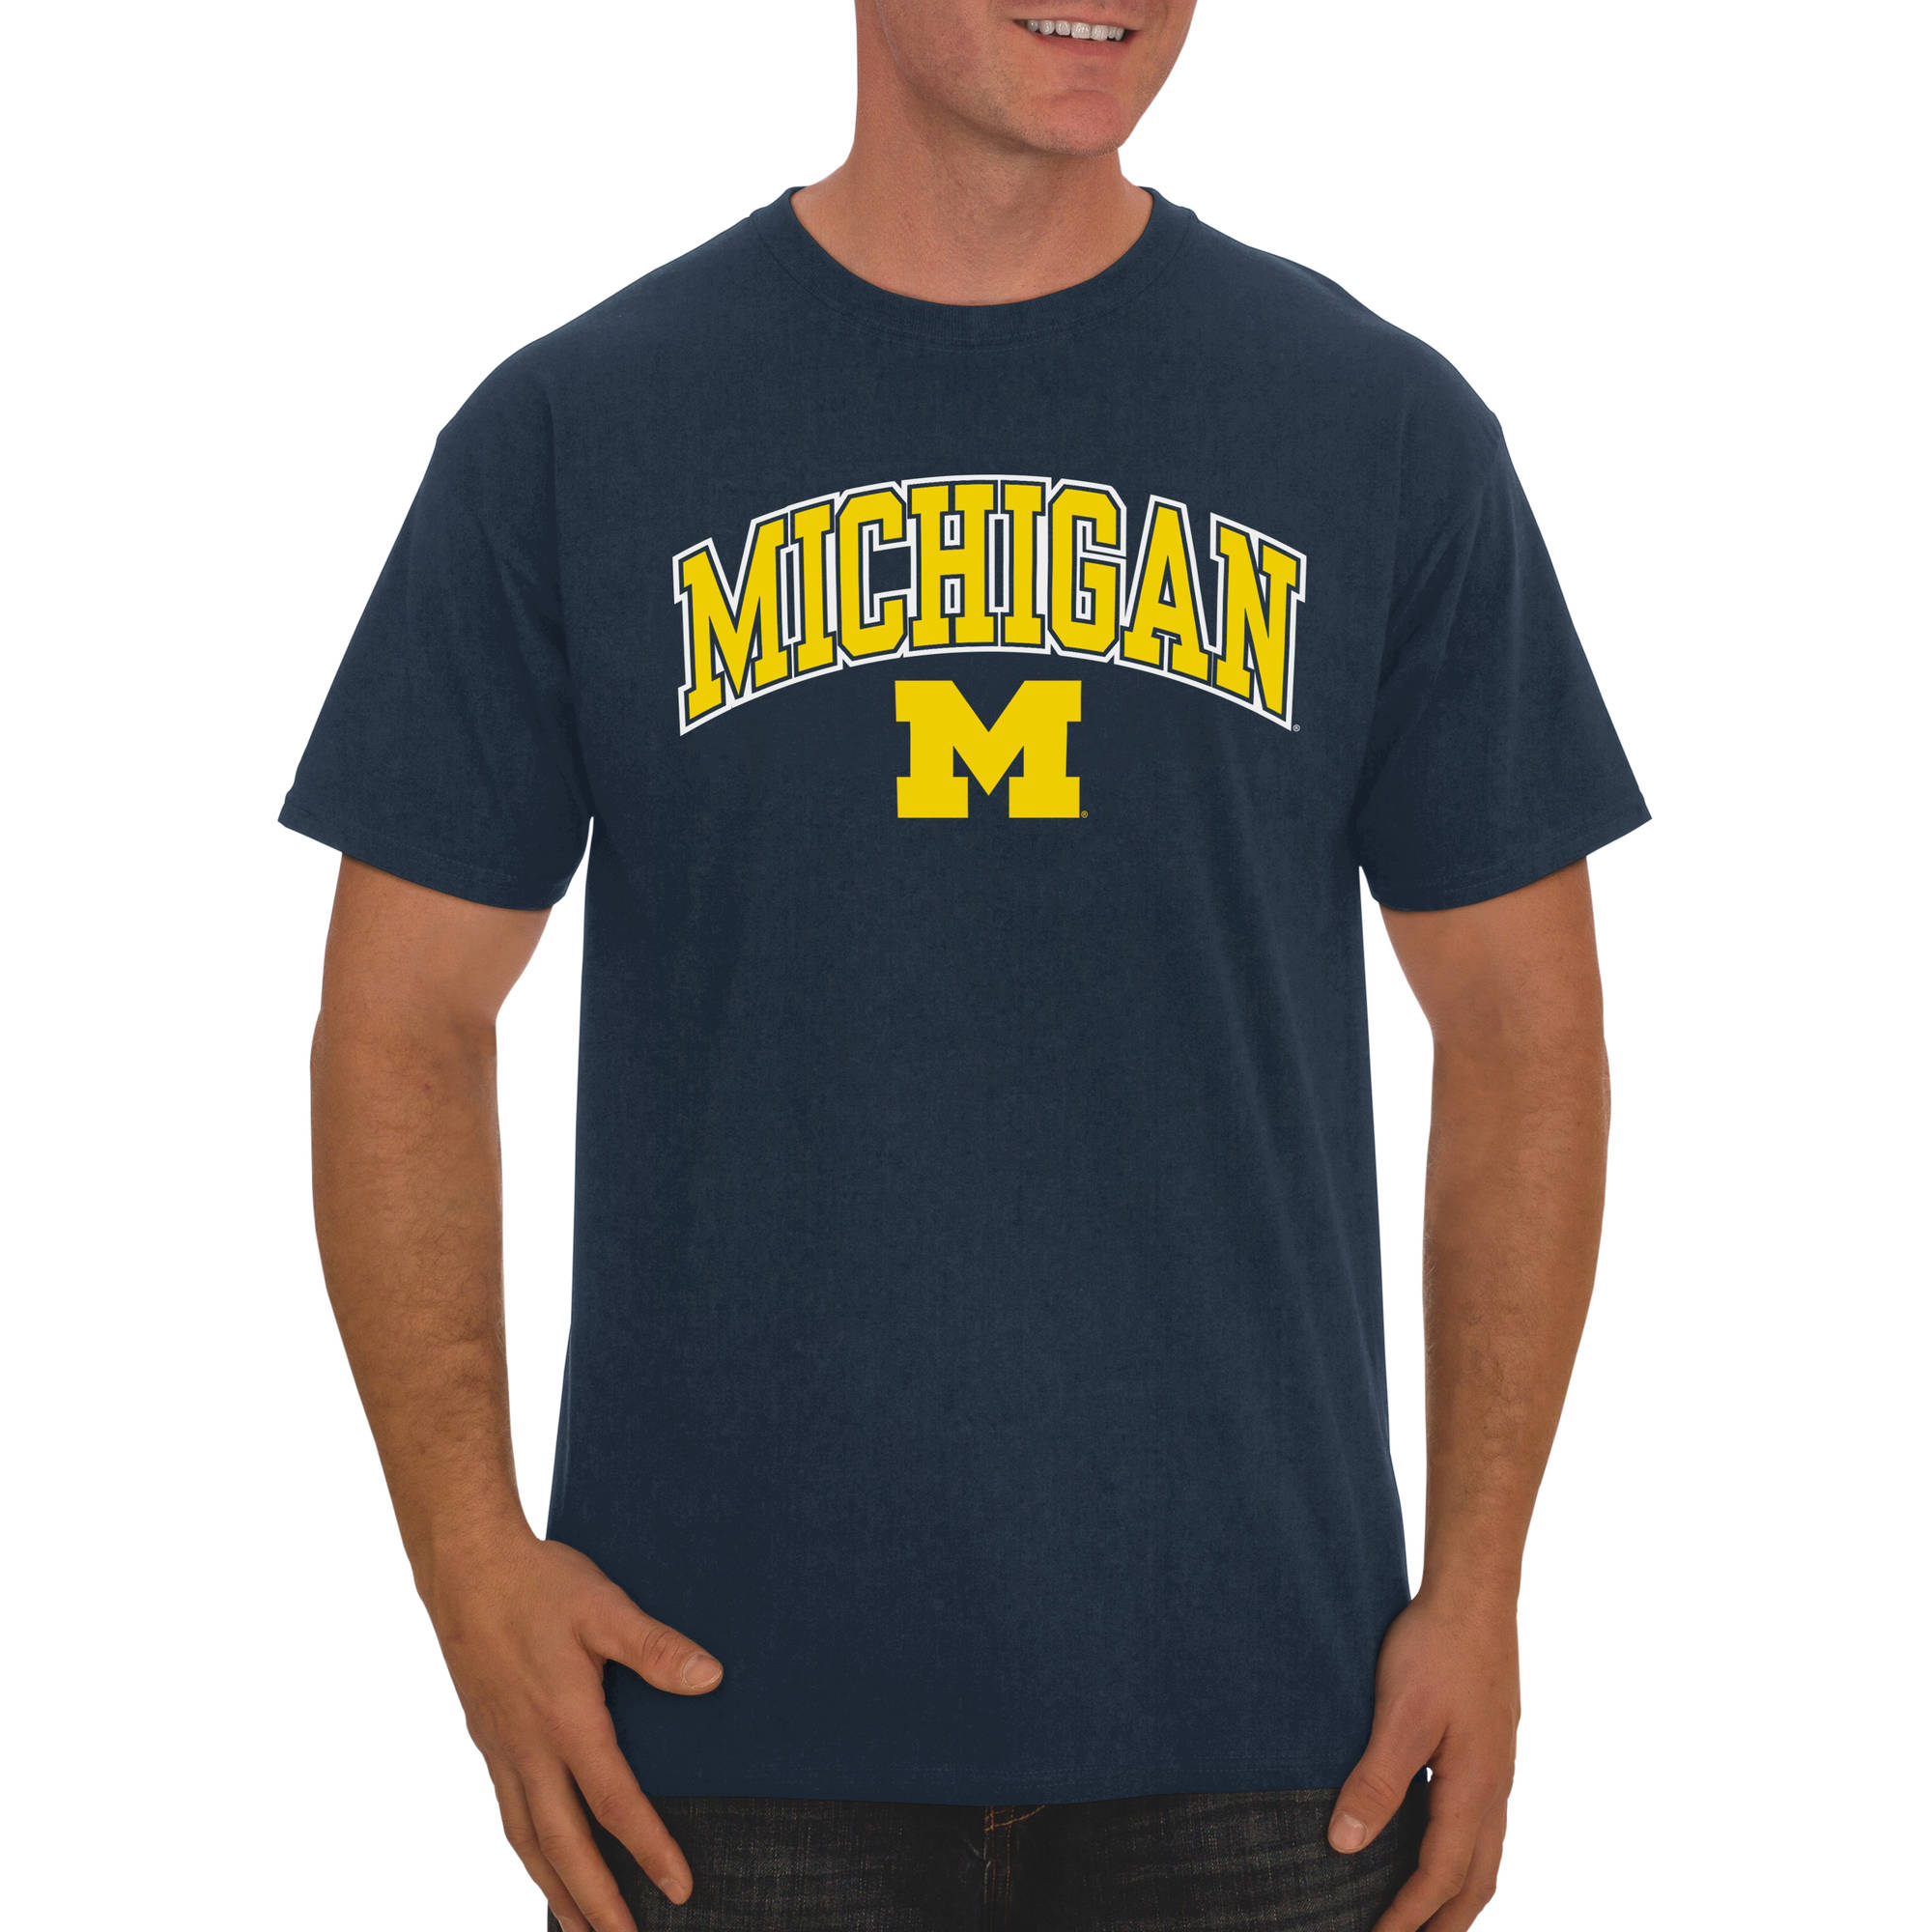 Russell NCAA Michigan Wolverines, Men's Classic Cotton T-Shirt - image 1 of 1